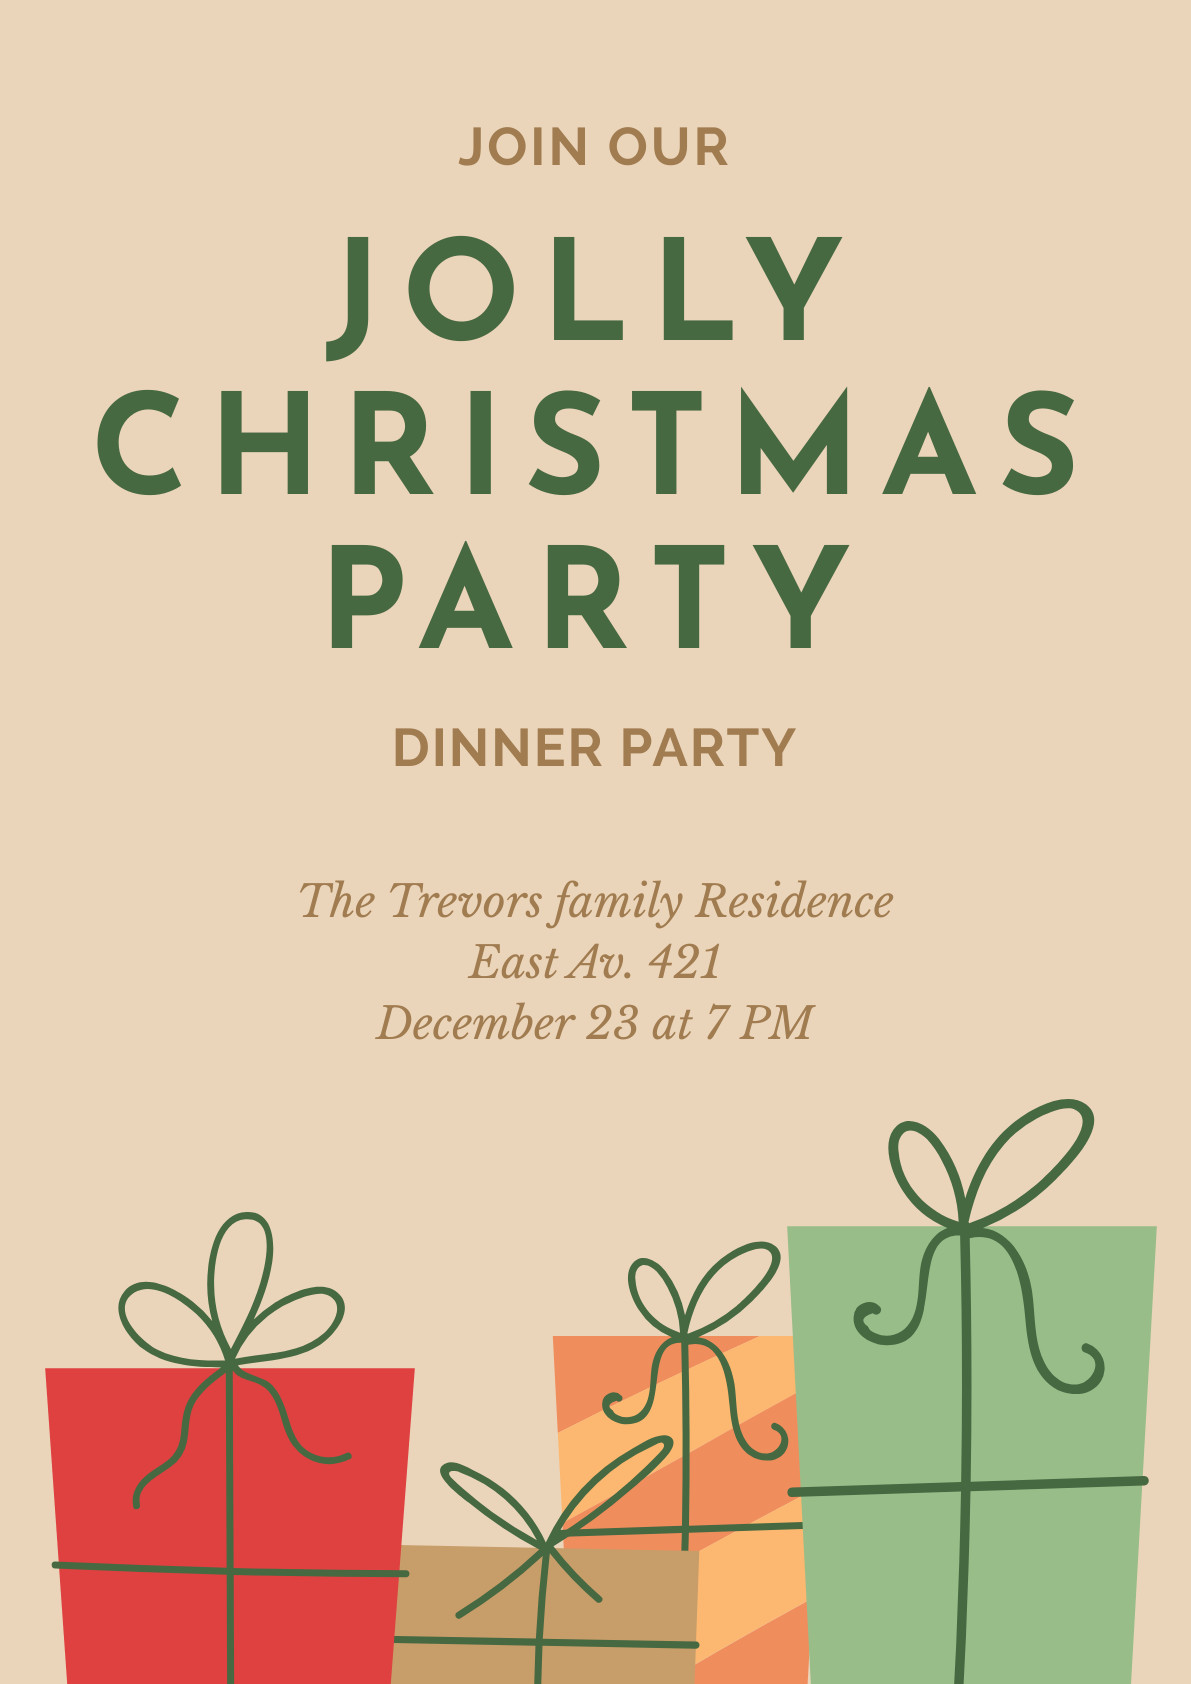 Jolly Christmas Party – Poster Template 1191x1684